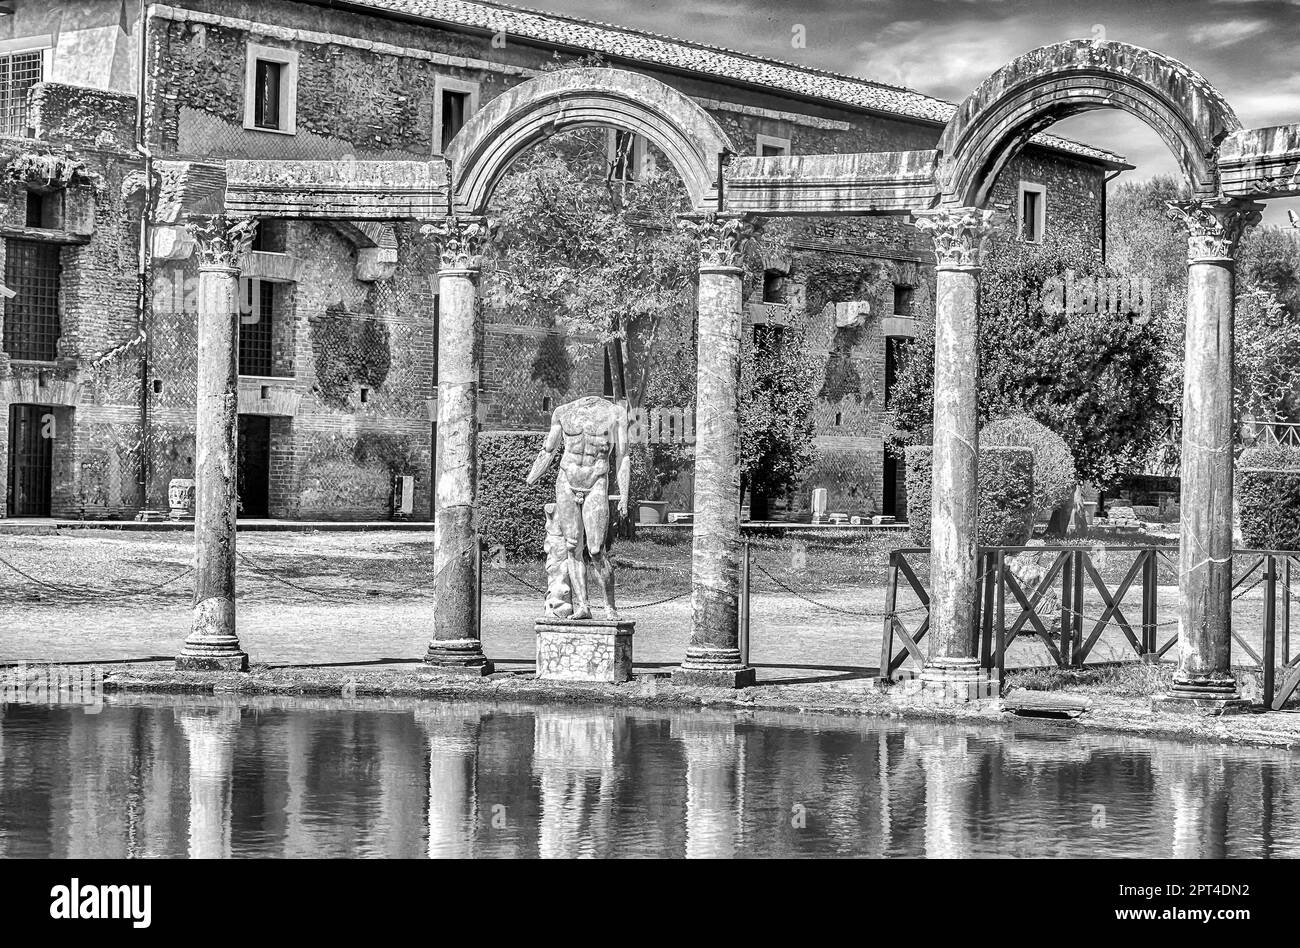 The ancient pool called Canopus, surrounded by greek sculptures in Villa Adriana (Hadrian's Villa), Tivoli, Italy Stock Photo